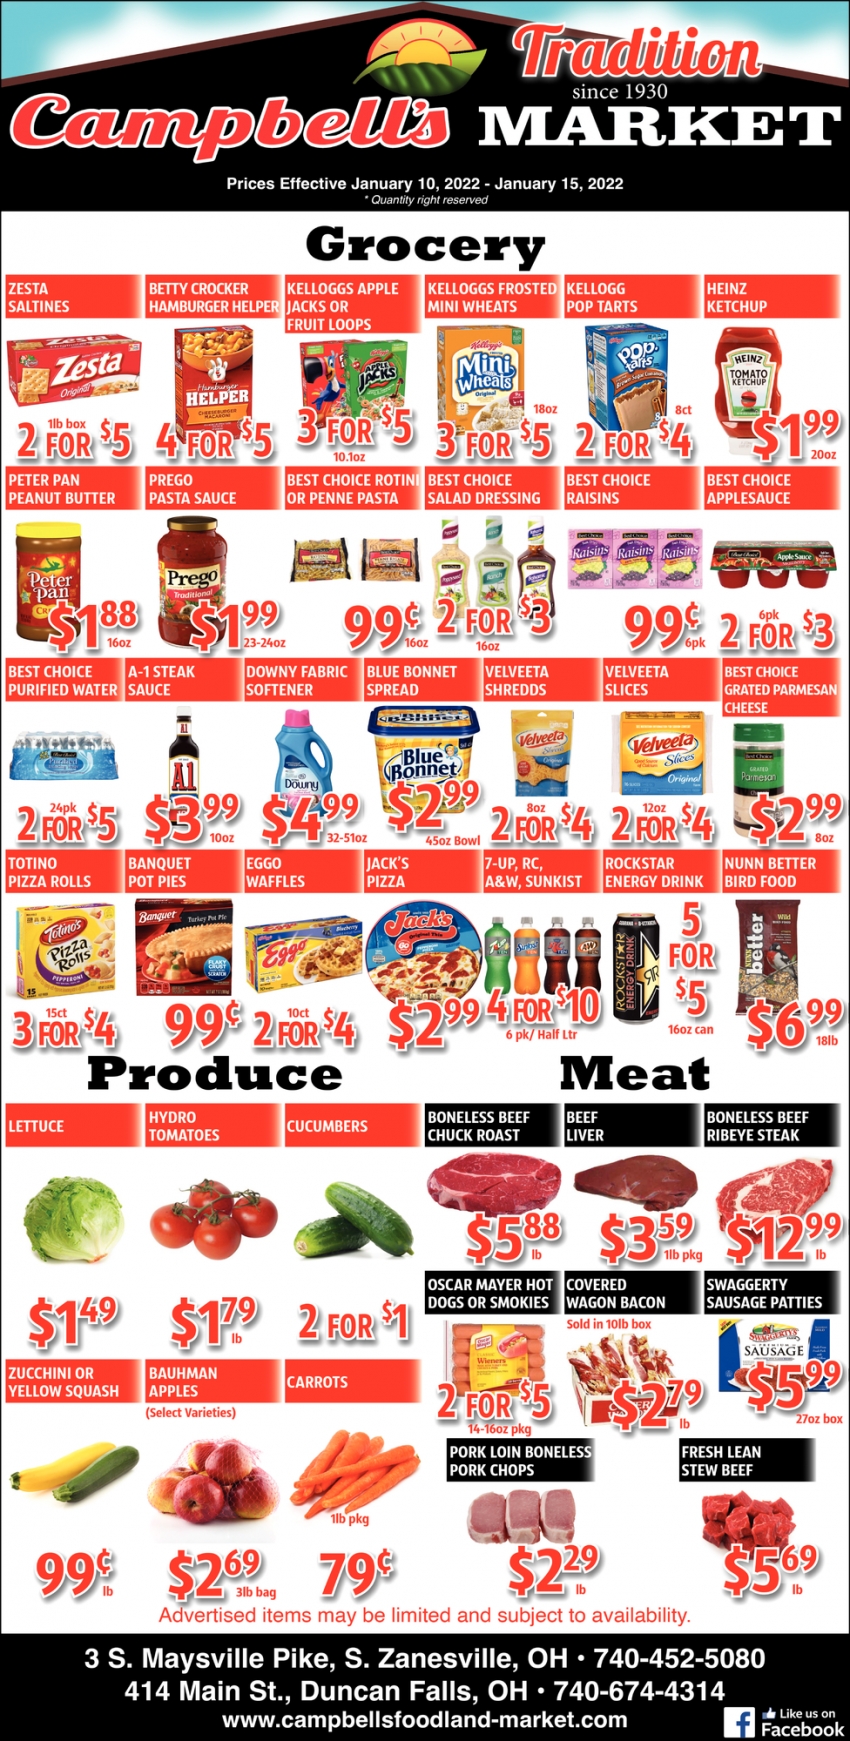 Grocery, Produce, Meat